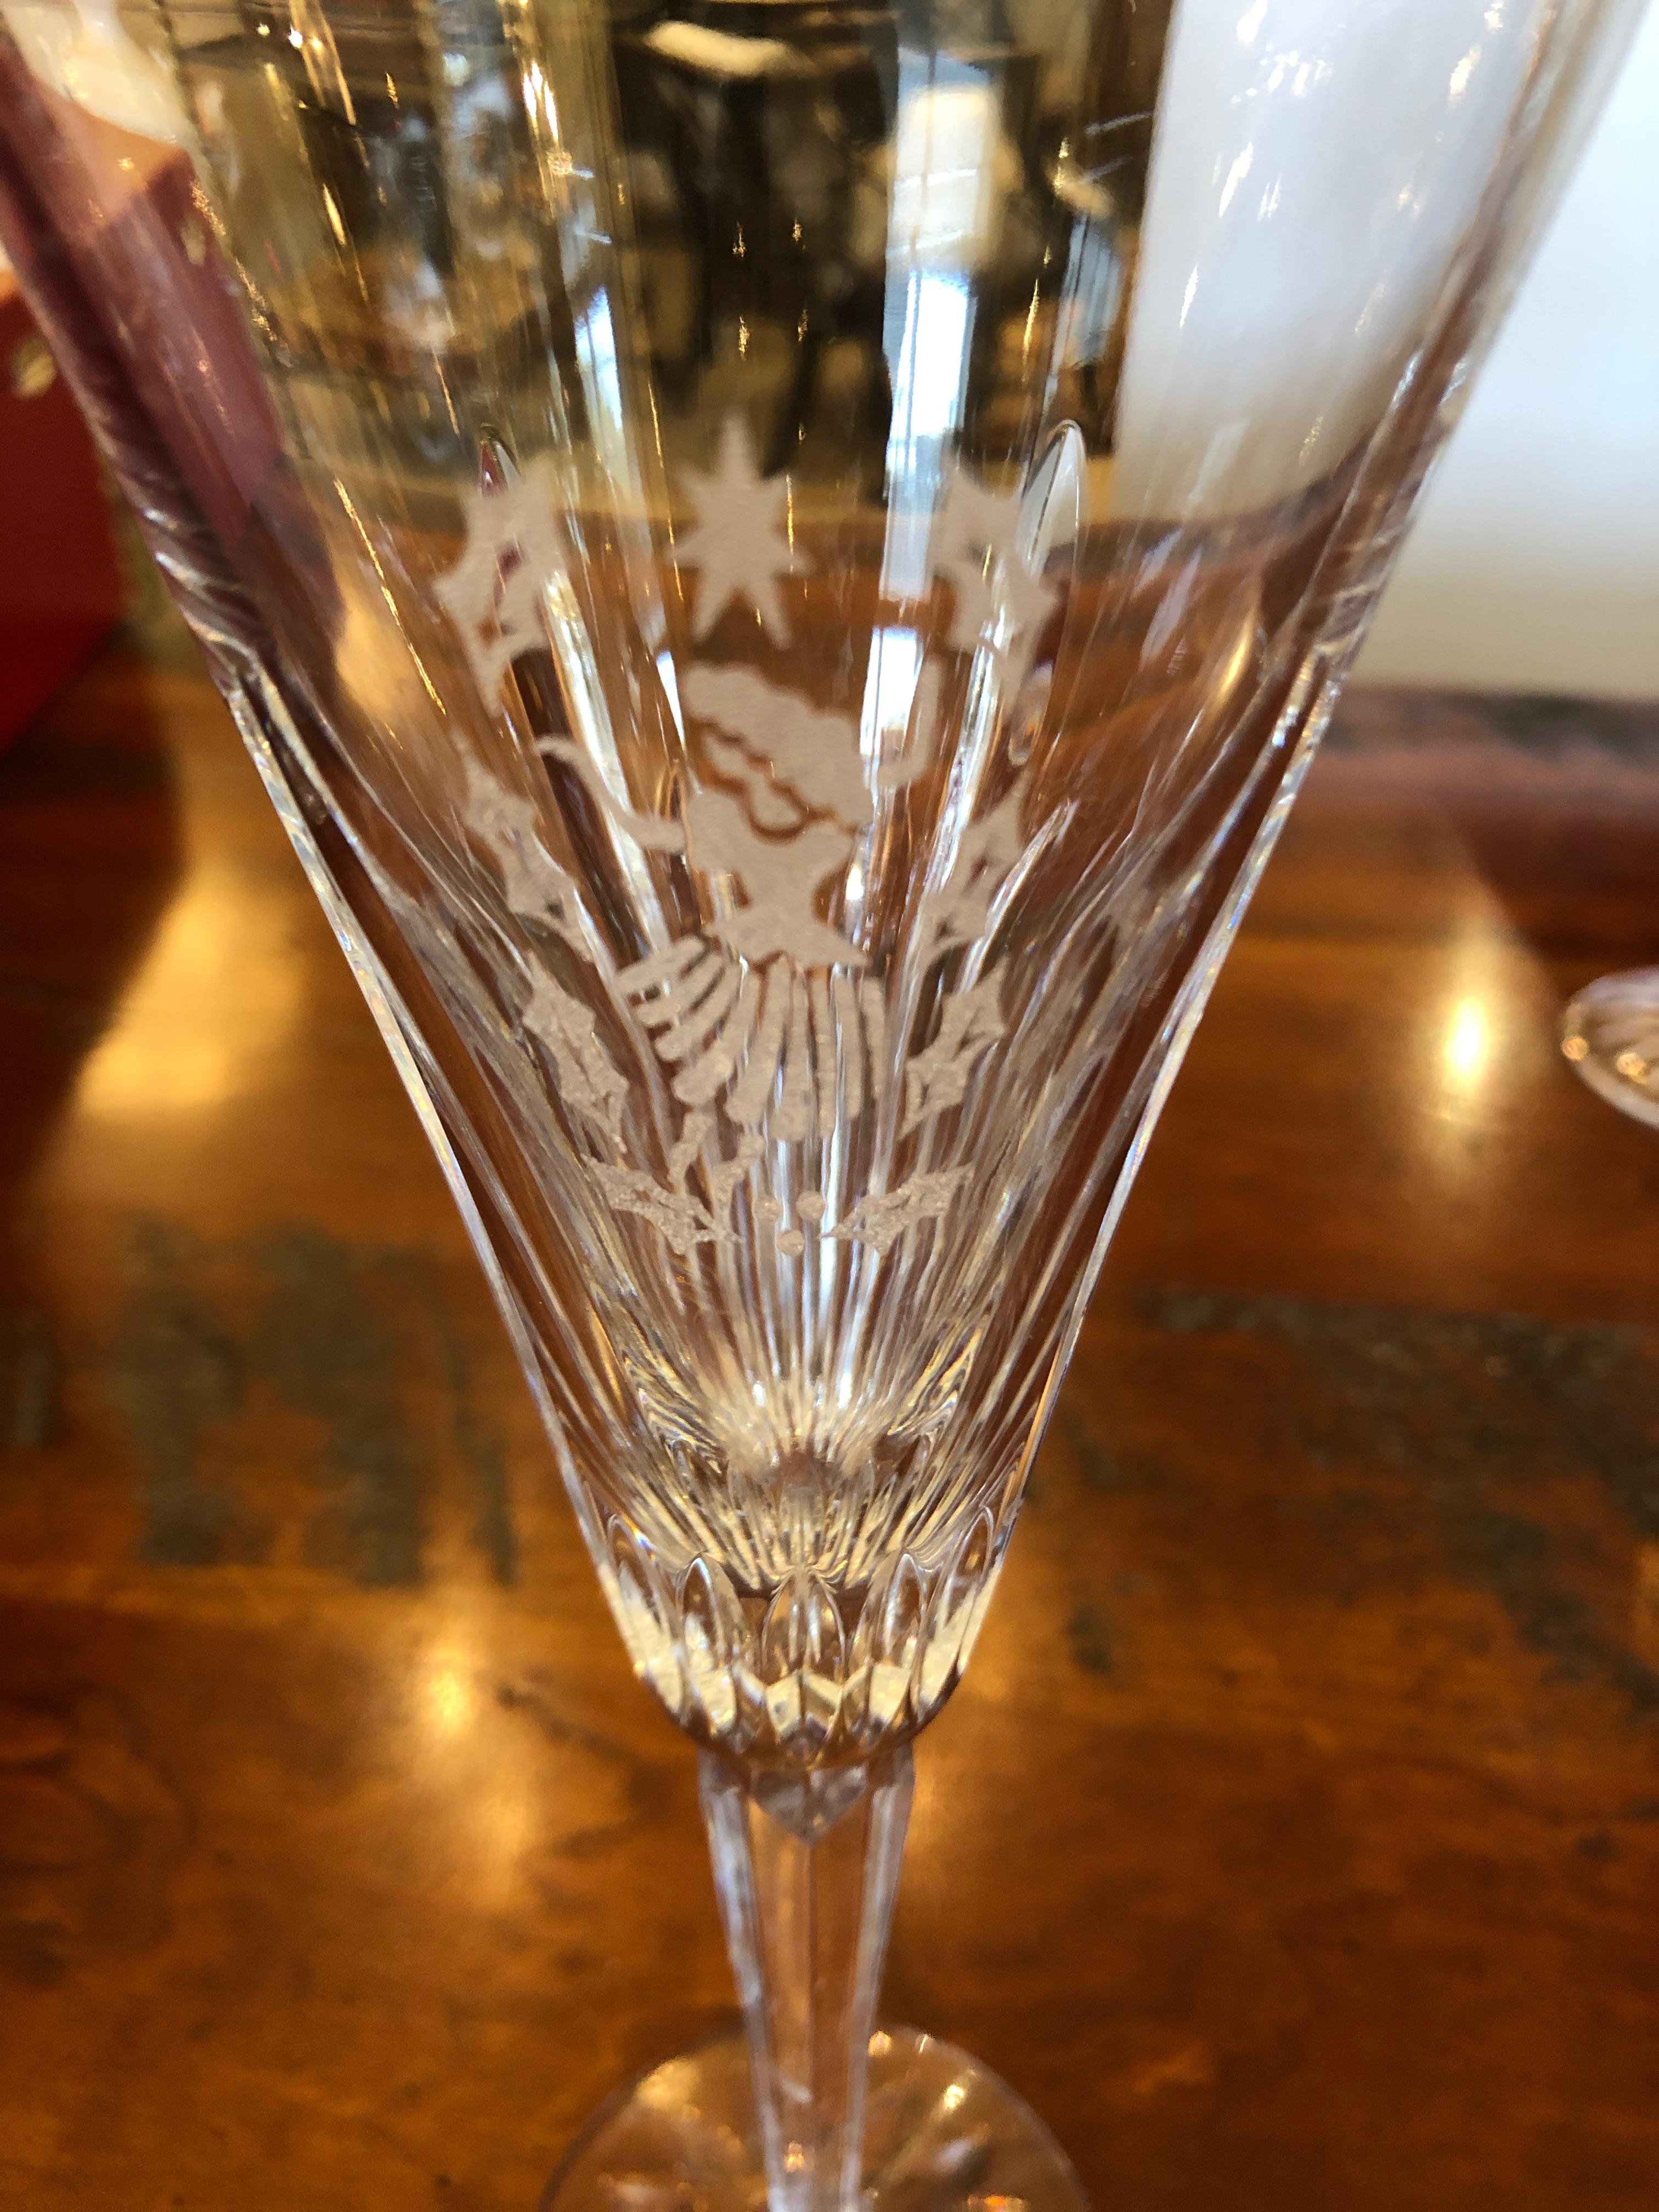 12 days of christmas waterford flutes